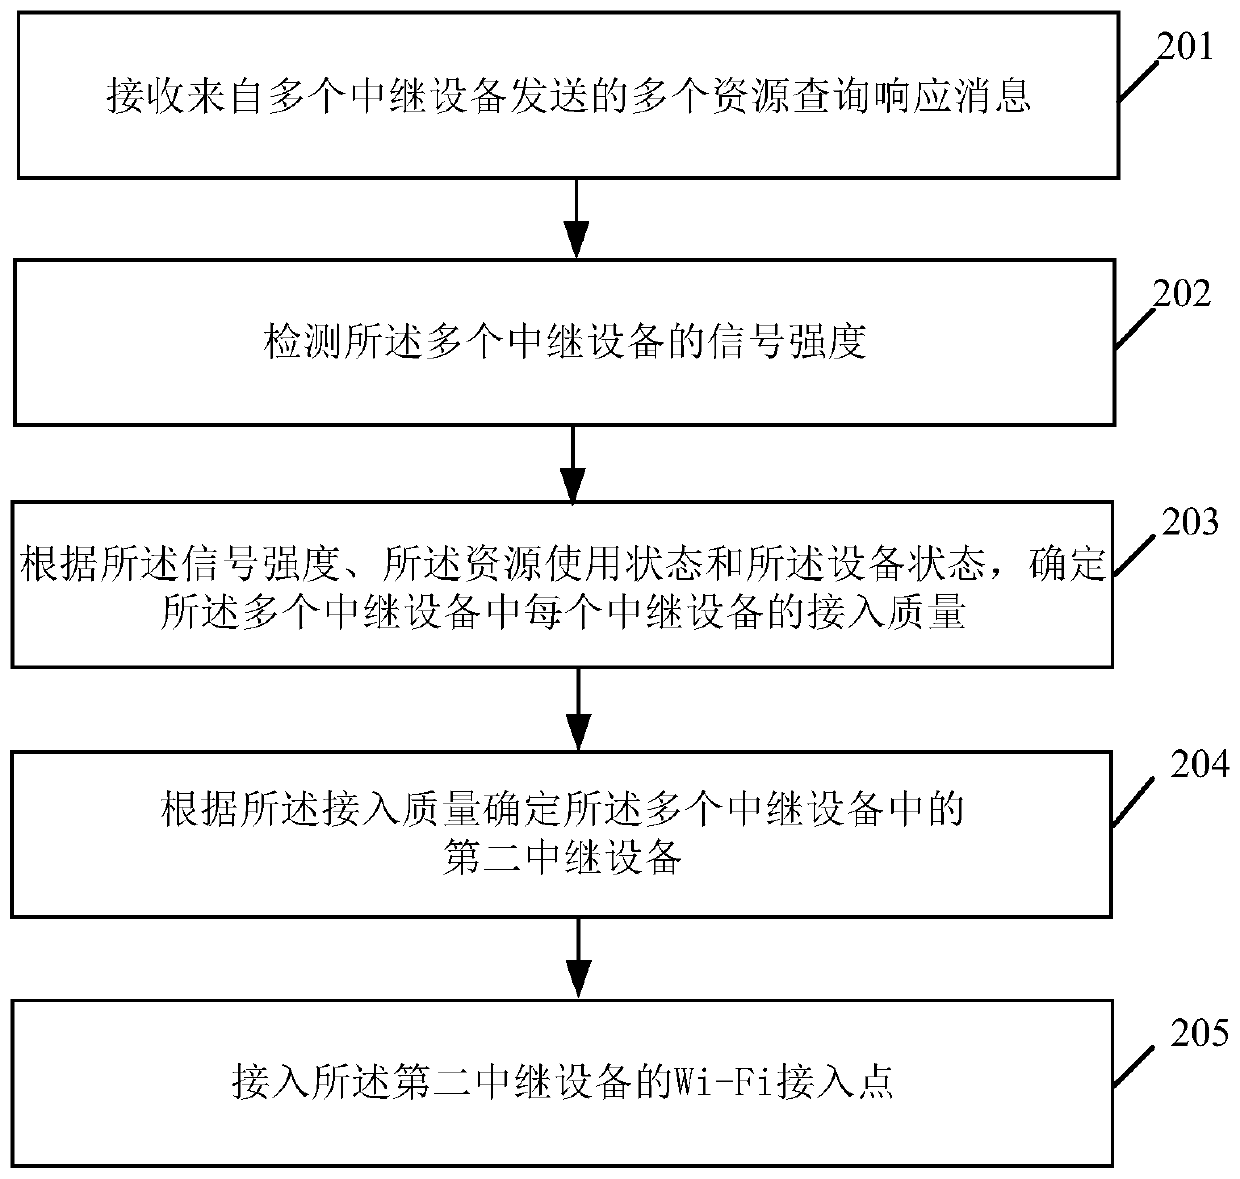 Communication control method and related product